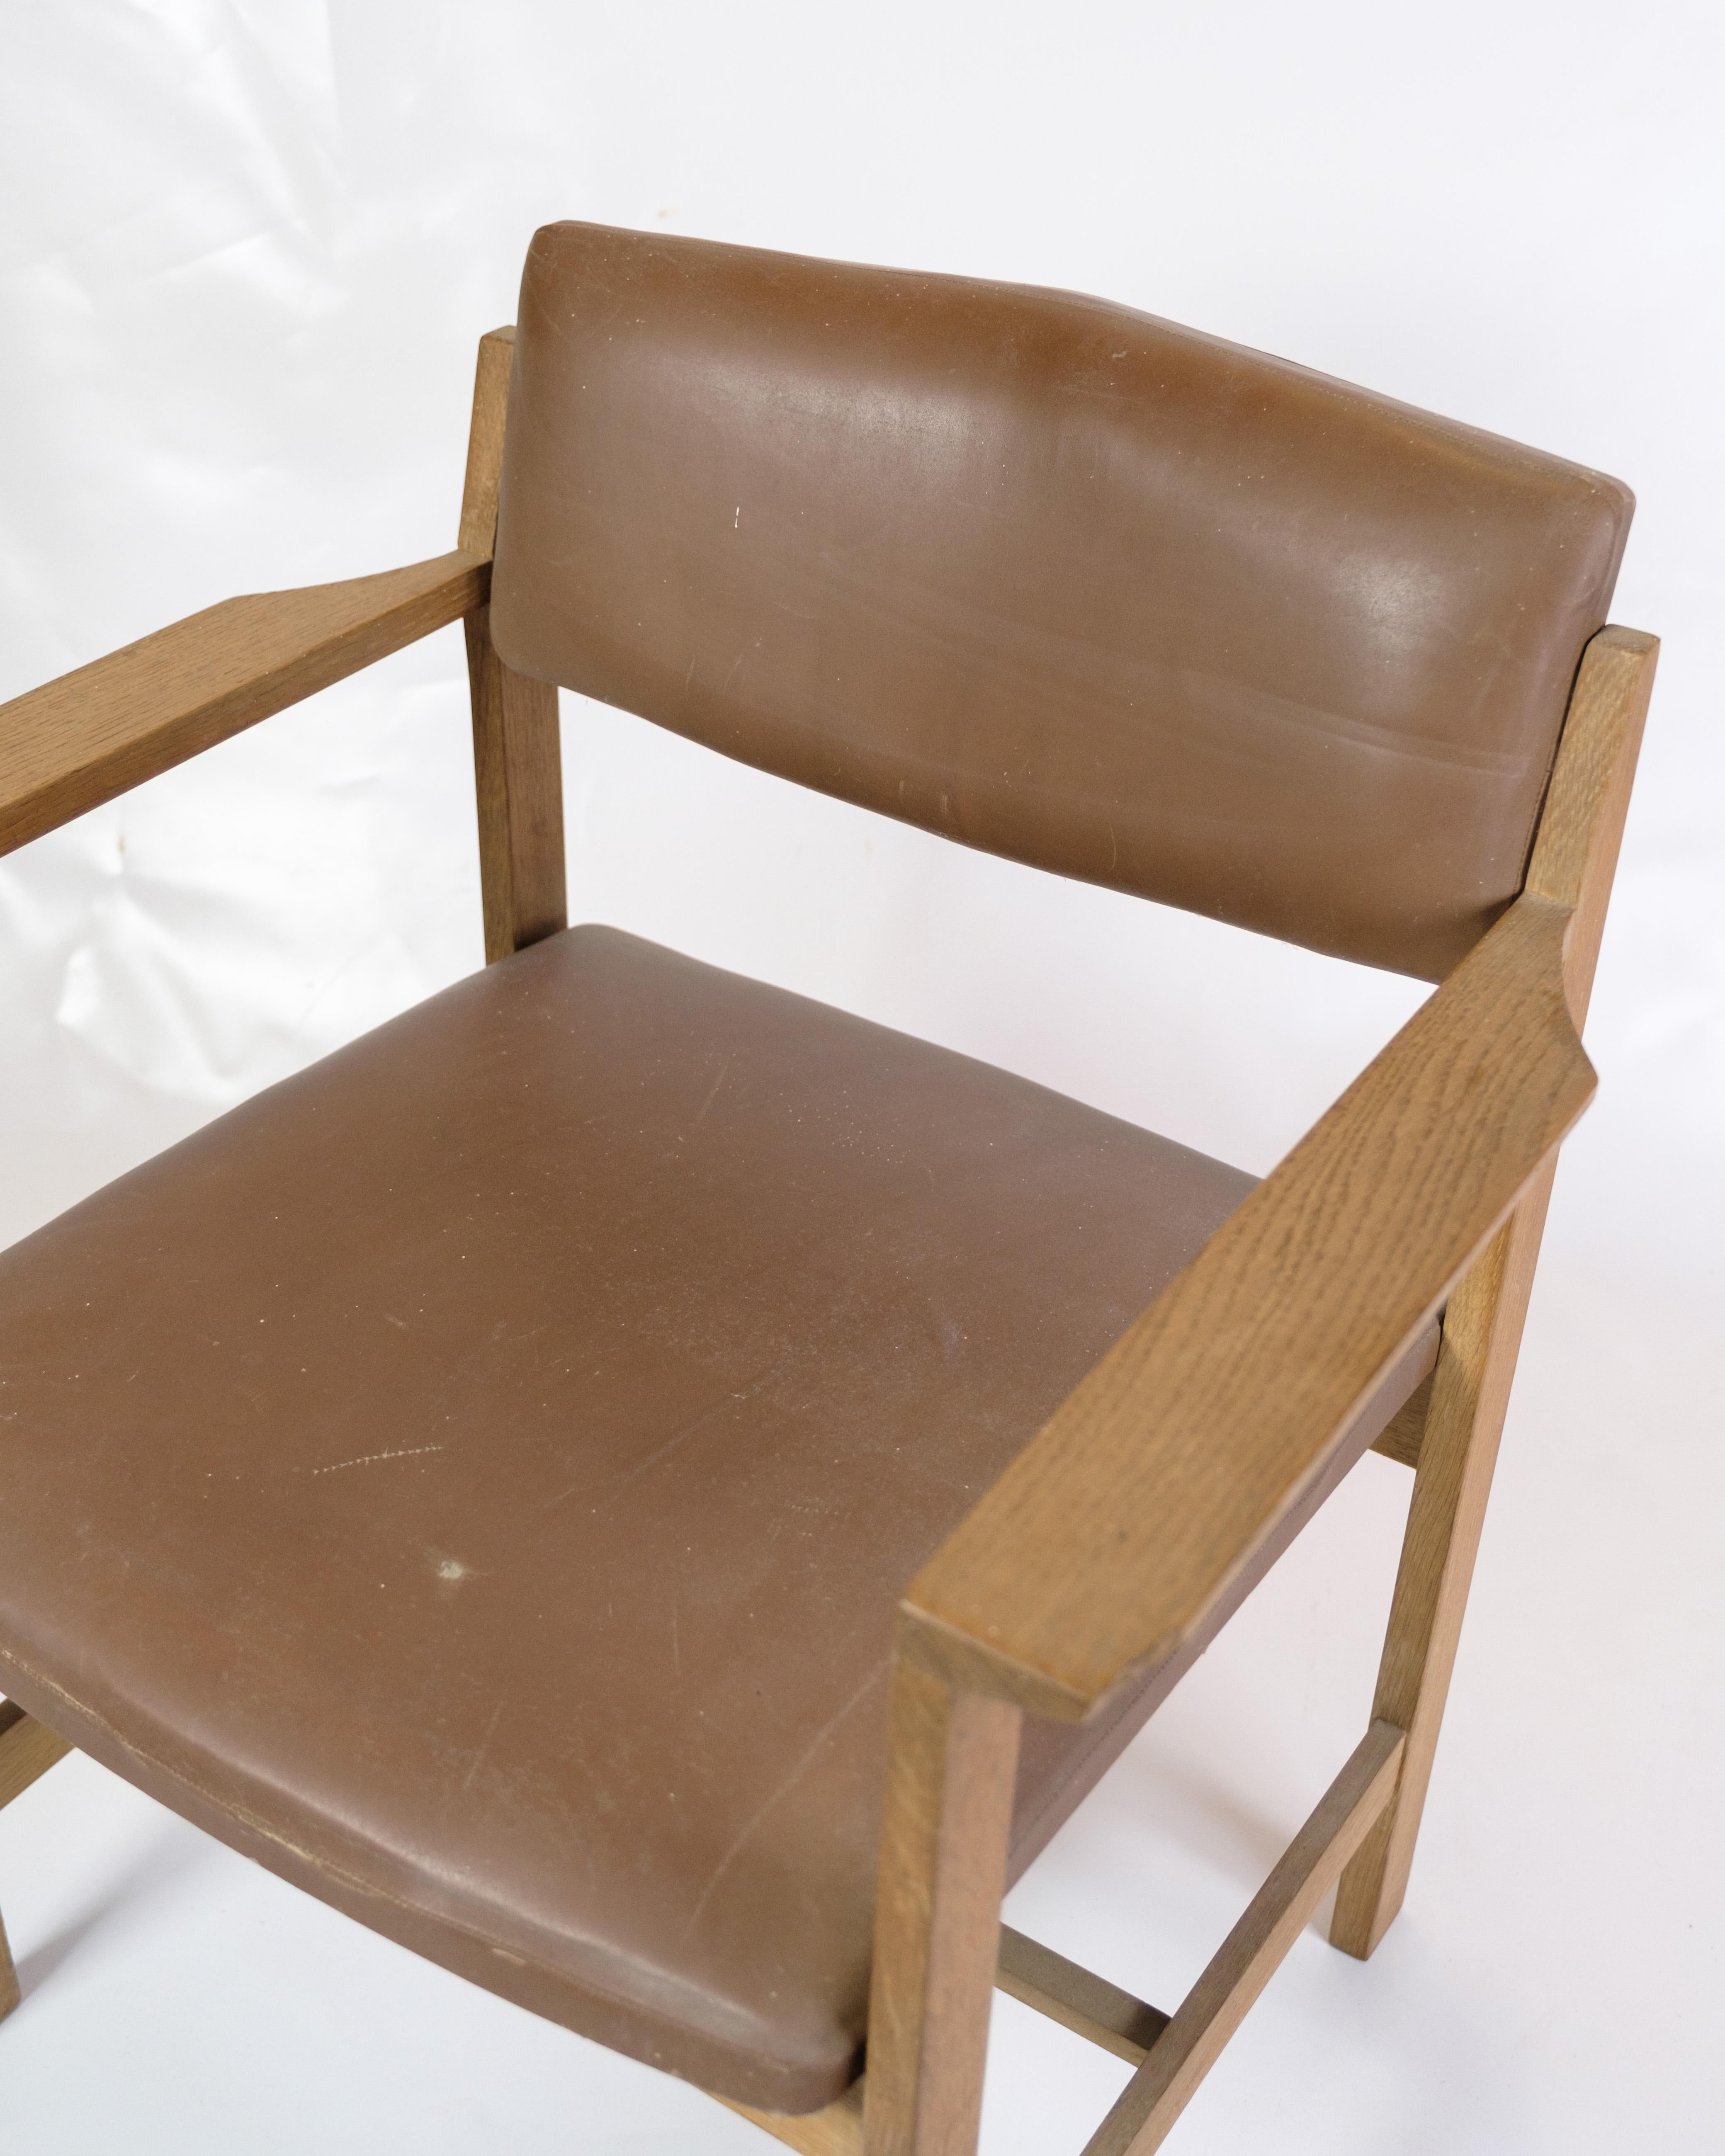 Office chair from 1970, made of robust oak and upholstered with brown leather. This timeless design will add a touch of elegance to any office or studio. With its ergonomic design and durable materials, it is not only stylish, but also comfortable